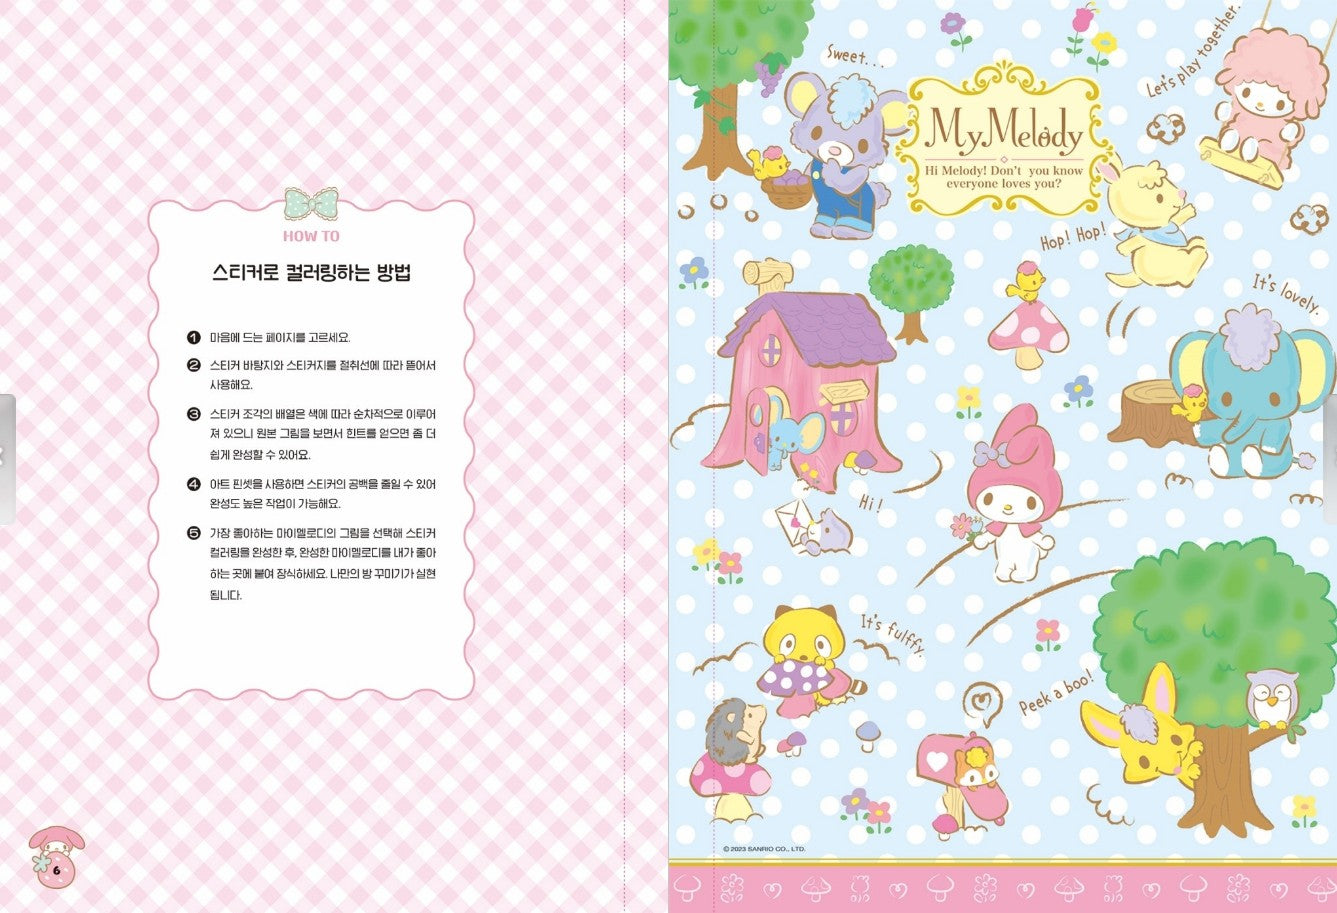 My Melody Sticker Coloring Book